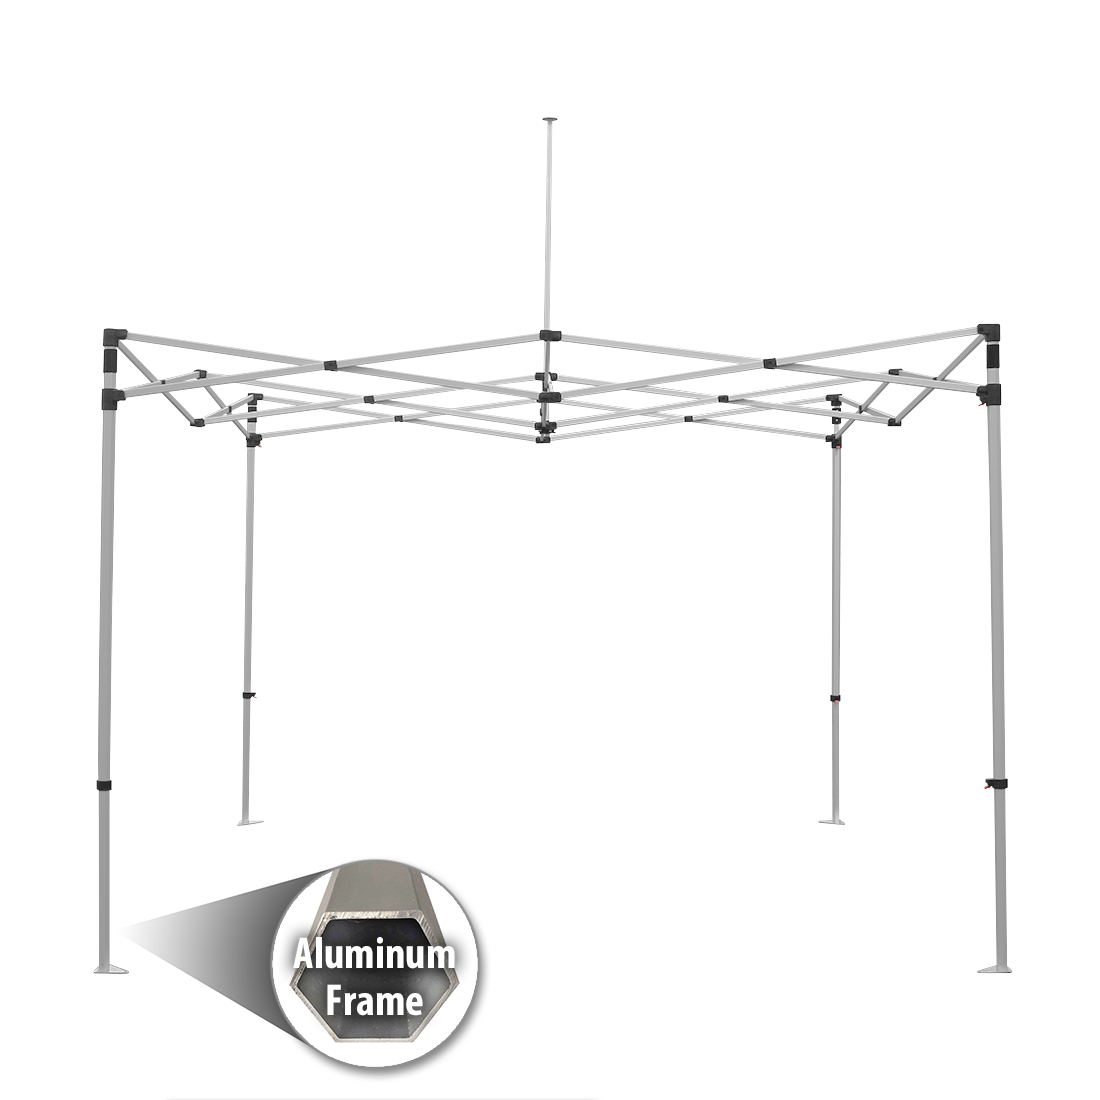 10x10 Aluminum Canopy Graphic Top With Hardware Included C/R